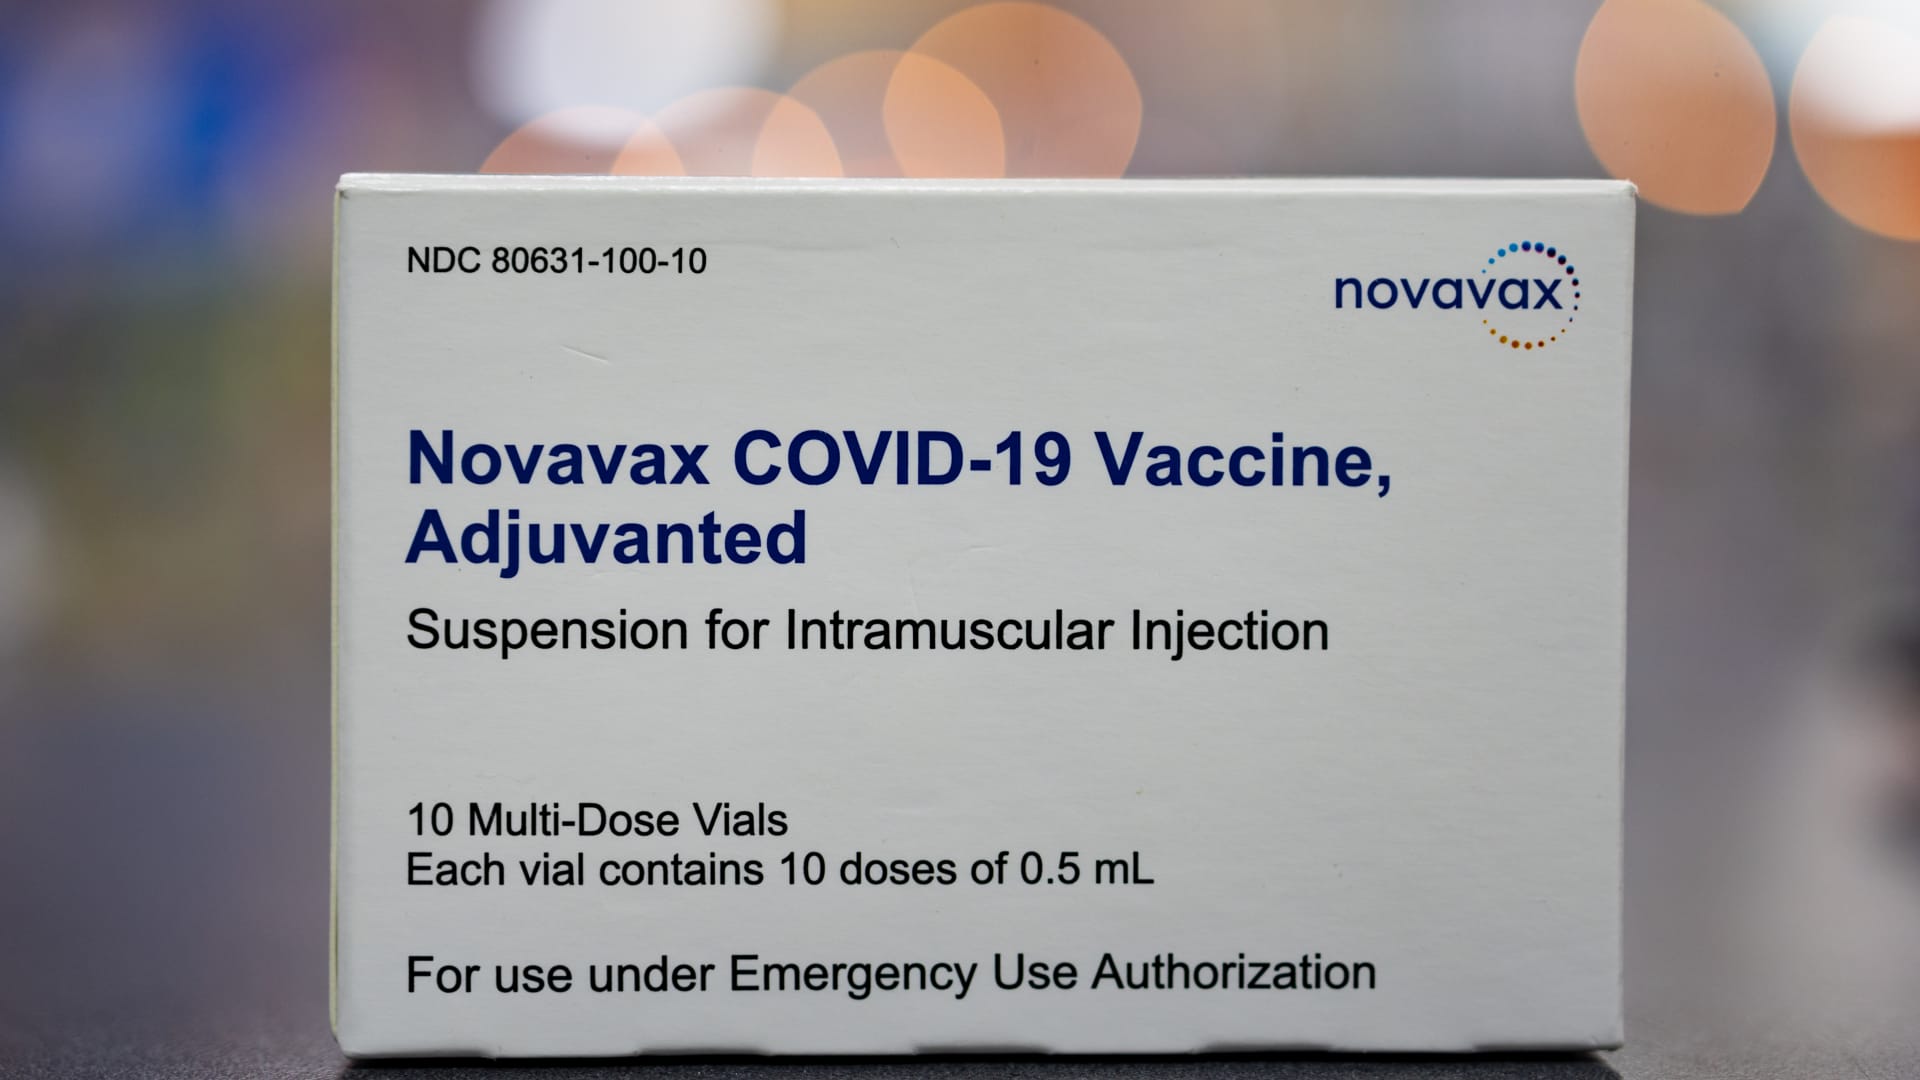 fda-authorizes-emergency-use-for-novavax-covid-19-vaccine-for-ages-12-to-17